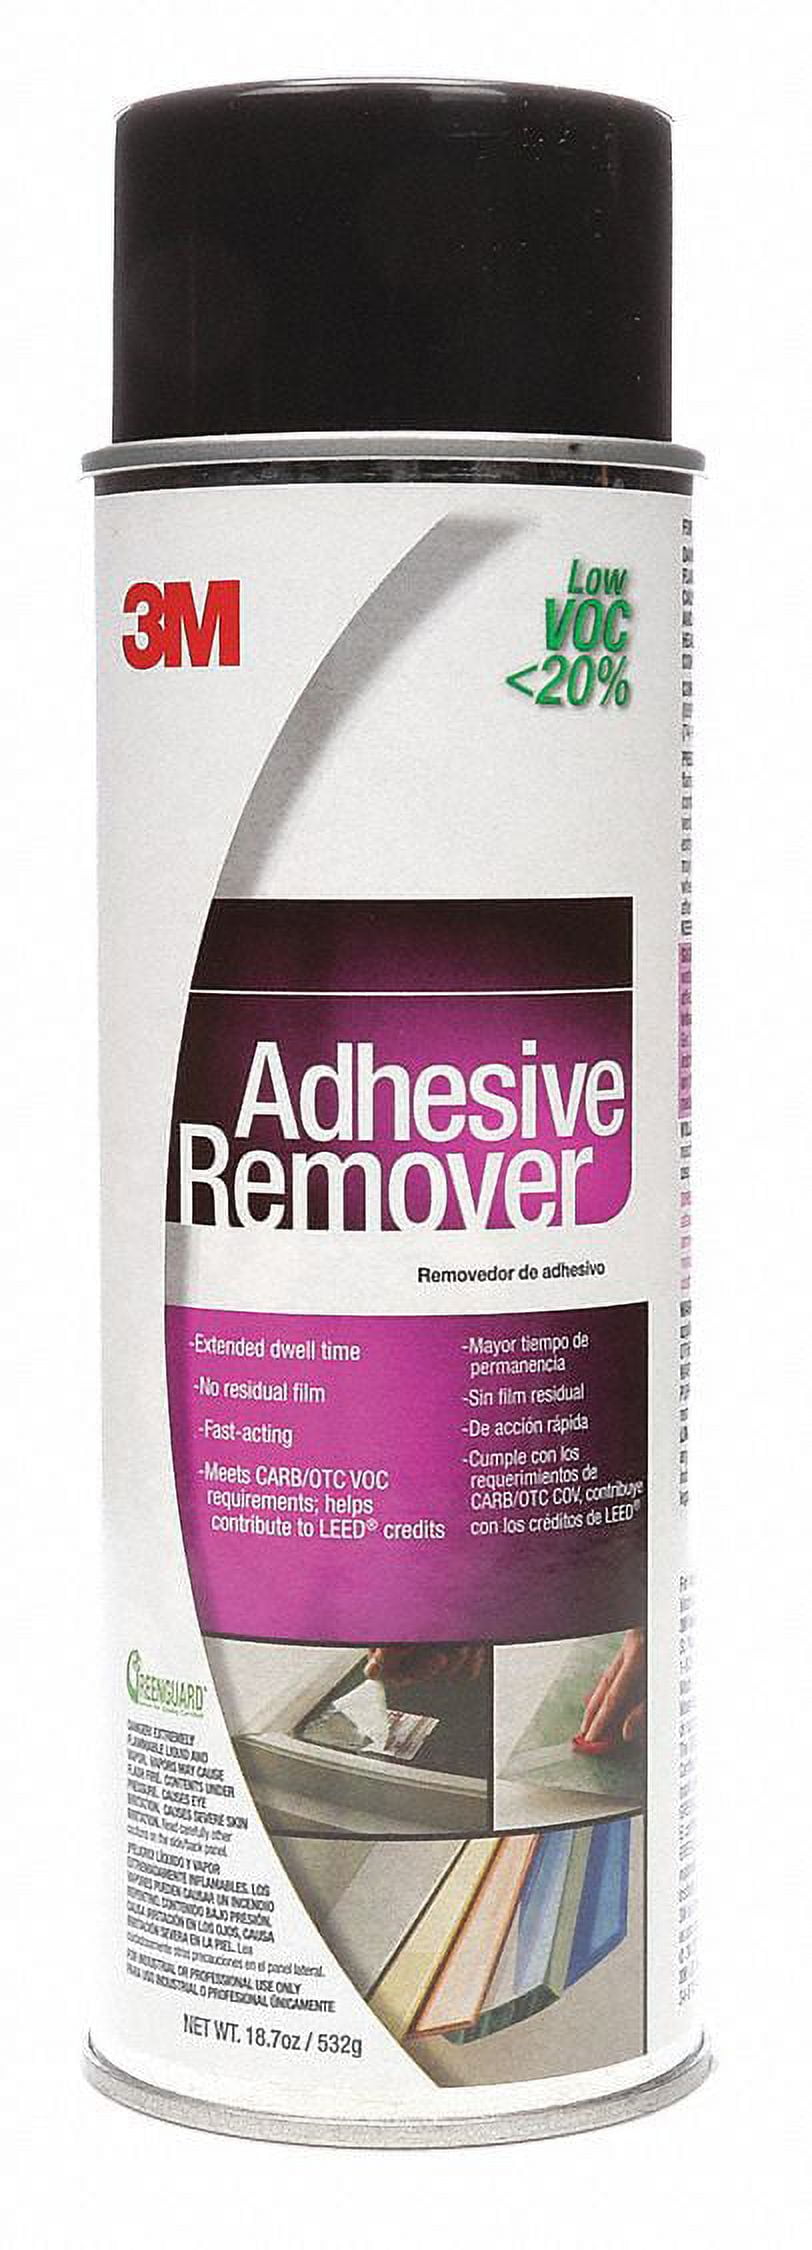 3m Remover,18.7 oz.,Aerosol Can,Clears 62-4883-4930-9 